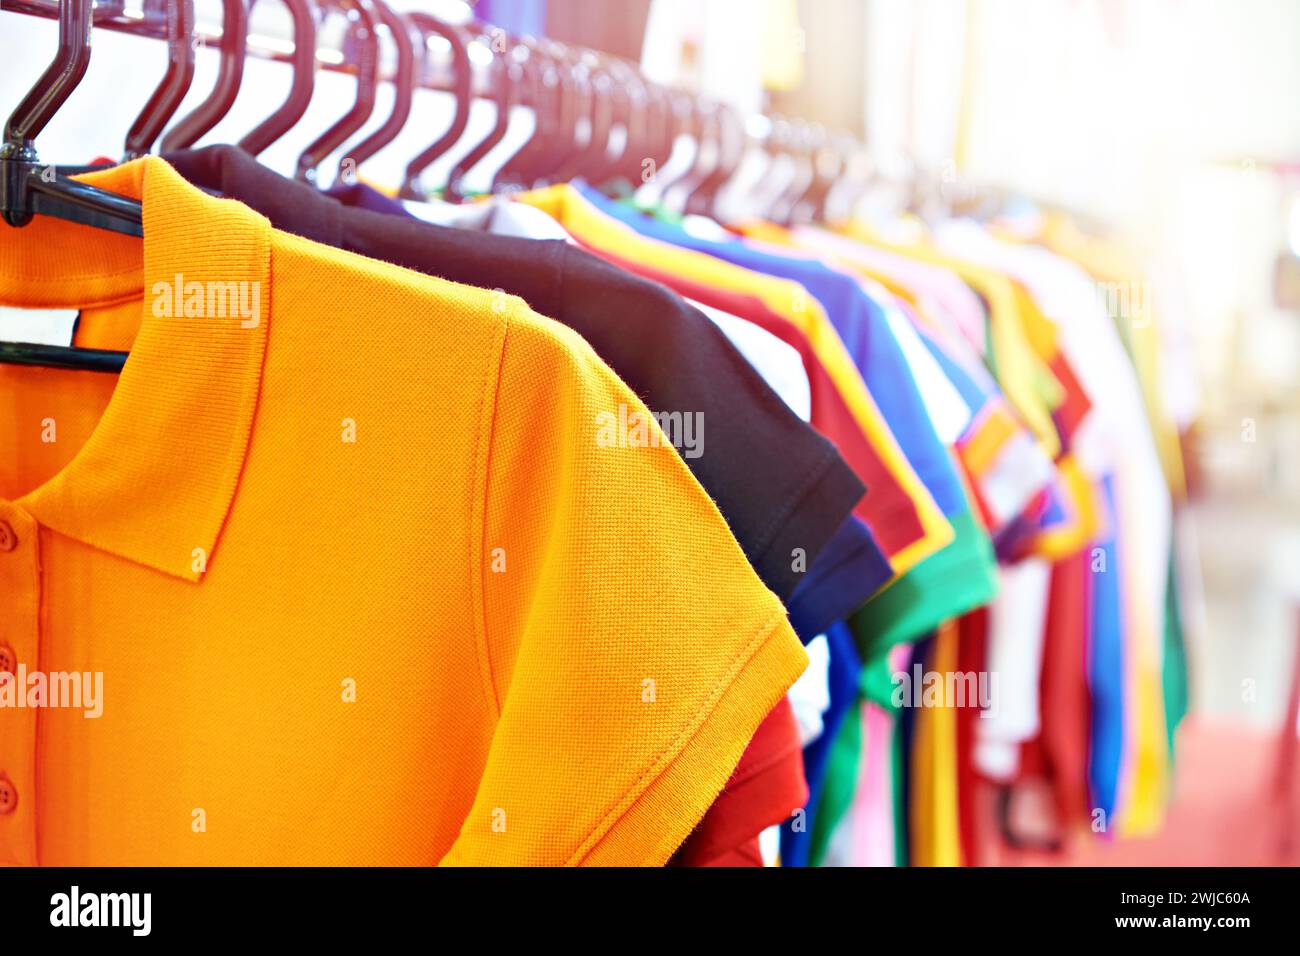 Fashion colored t-shirts on a hanger in a store Stock Photo